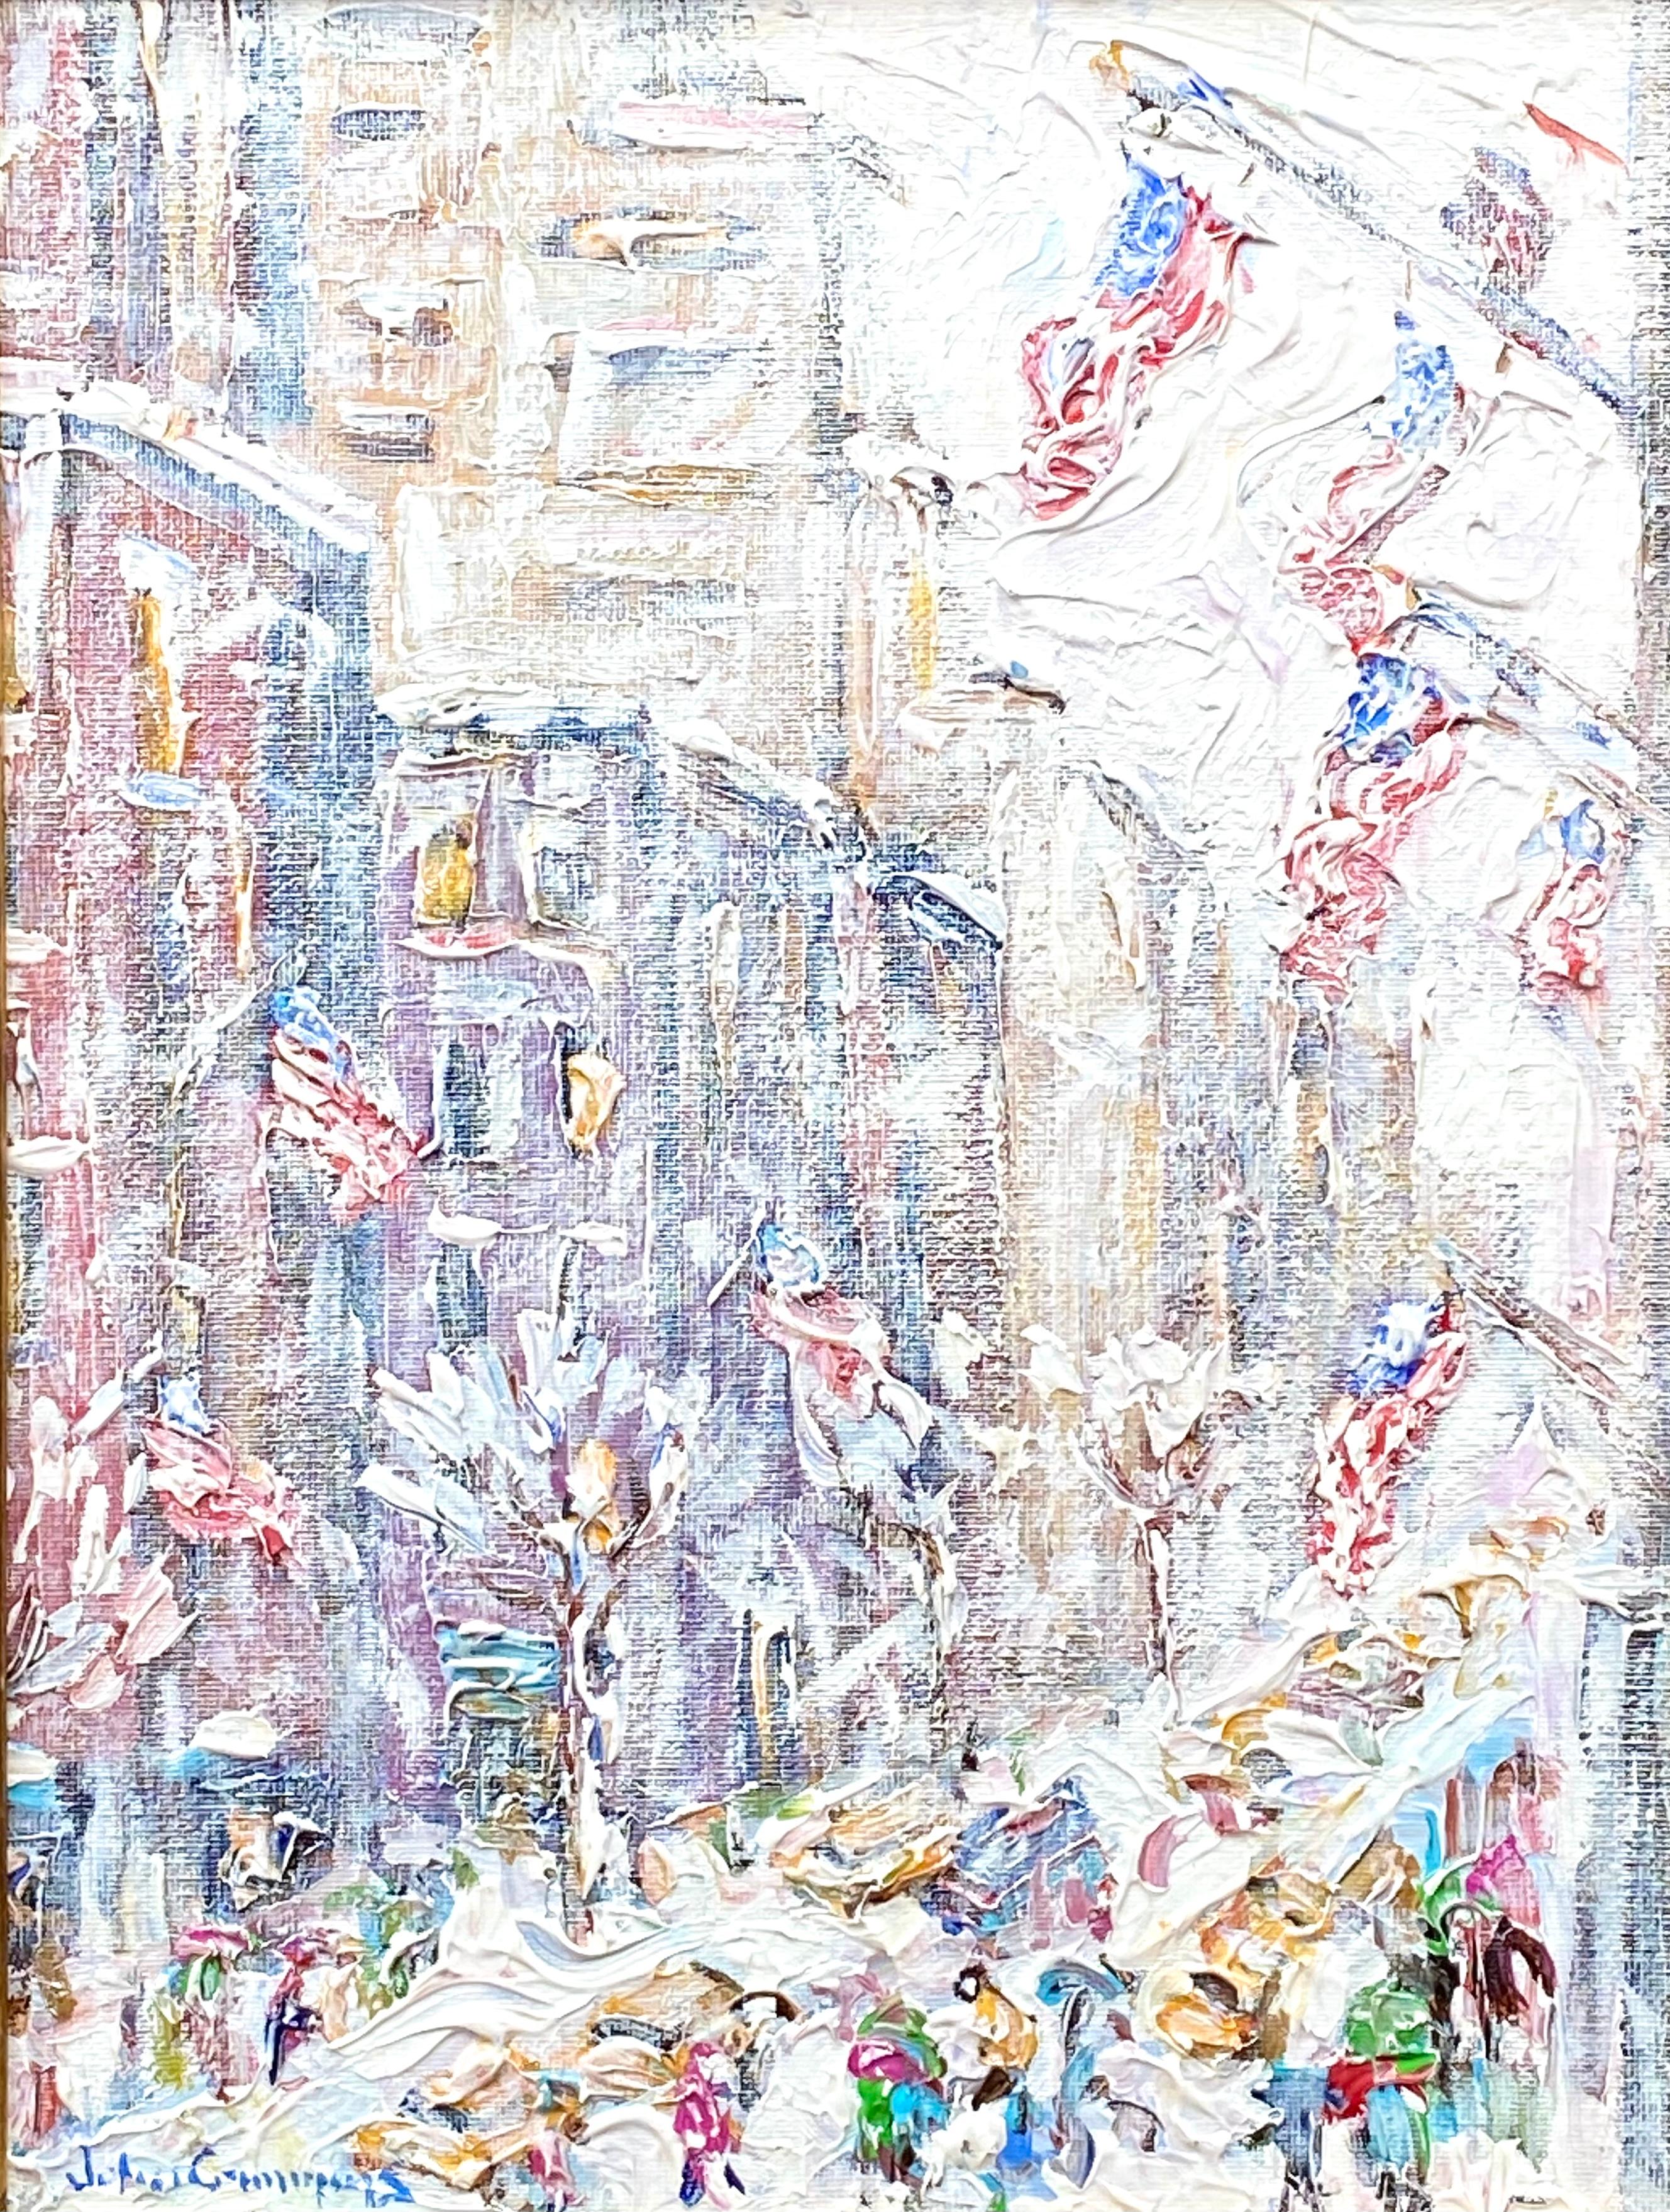 John Crimmins Figurative Painting - “Flags on Fifth Avenue”